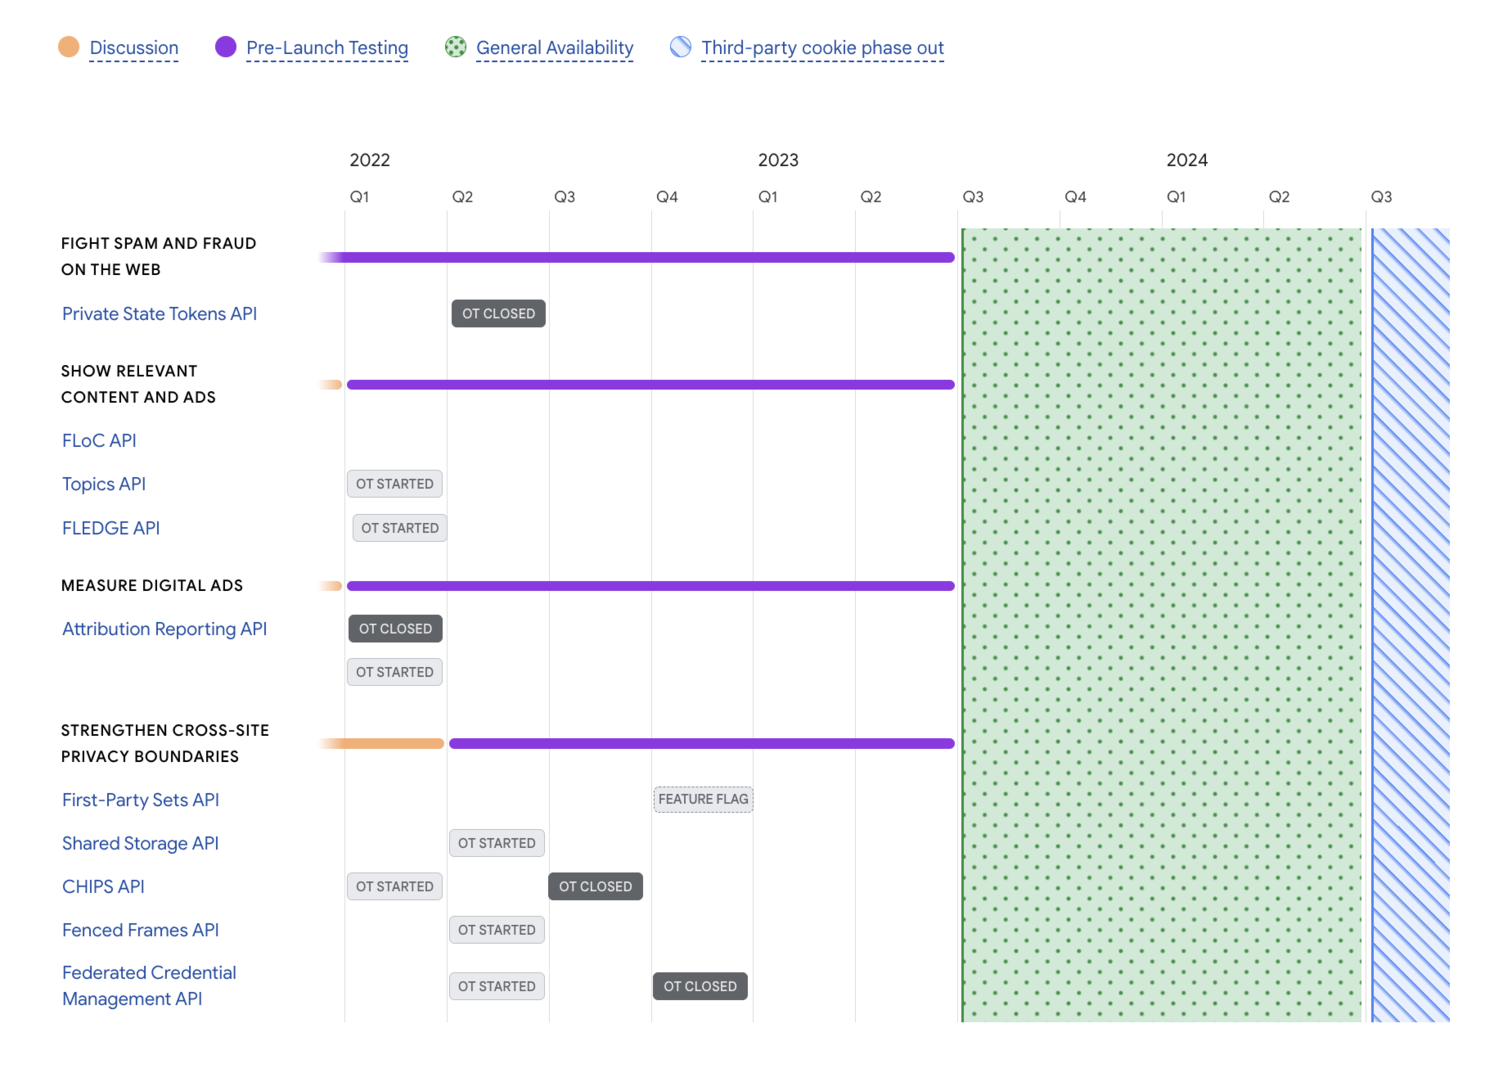 The Privacy Sandbox timeline is updated monthly and presents proposals from various stages in the development process